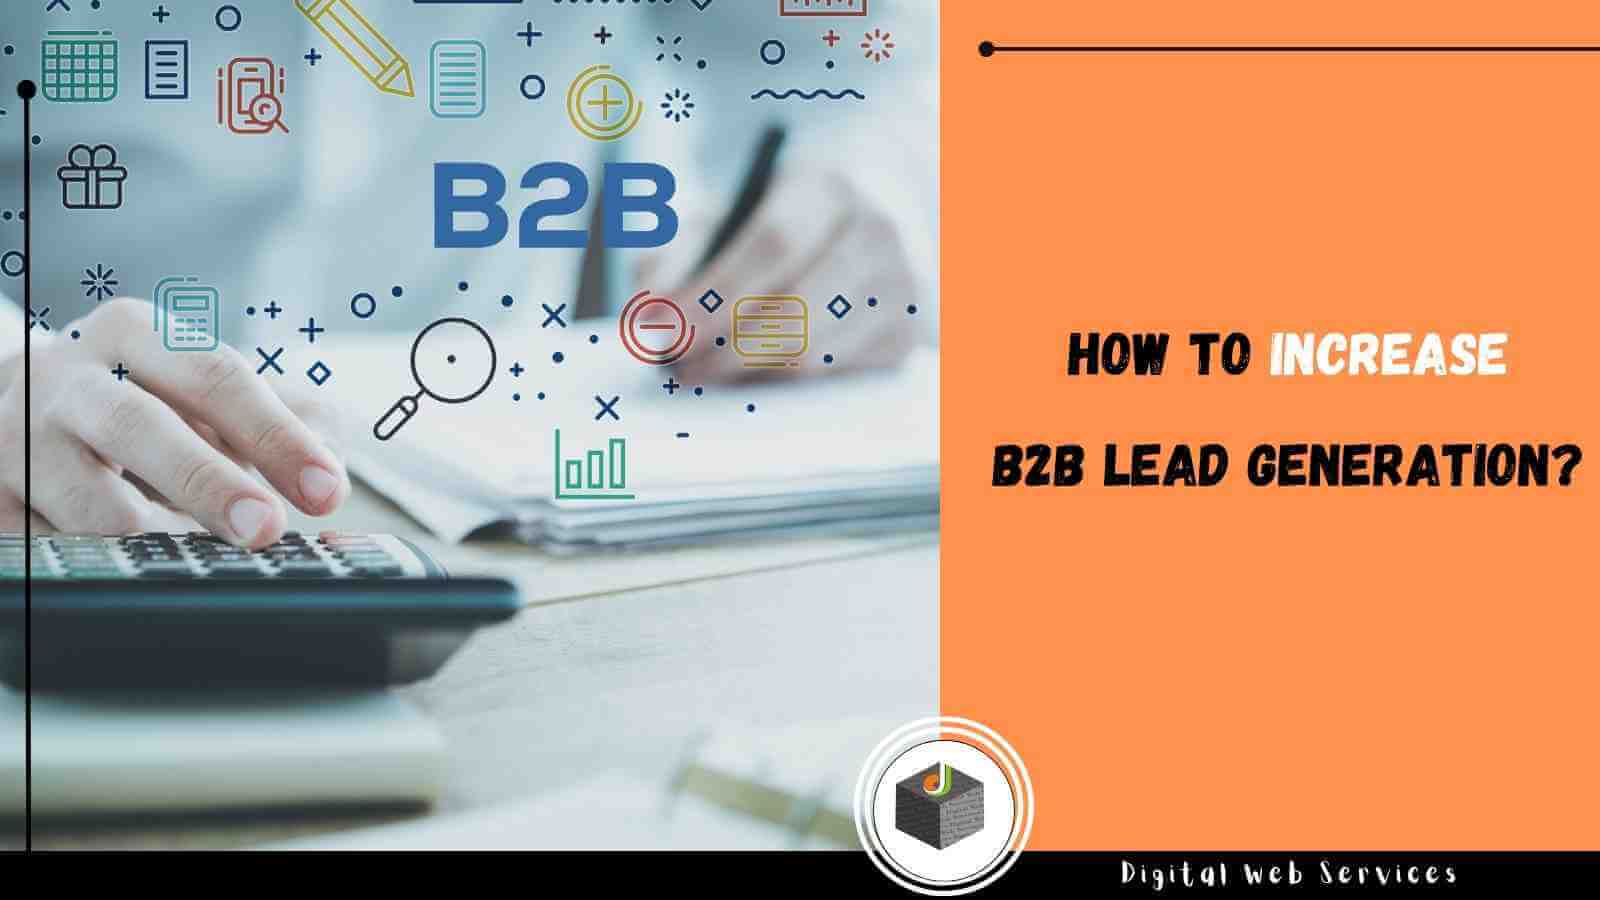  How to Increase B2B Lead Generation